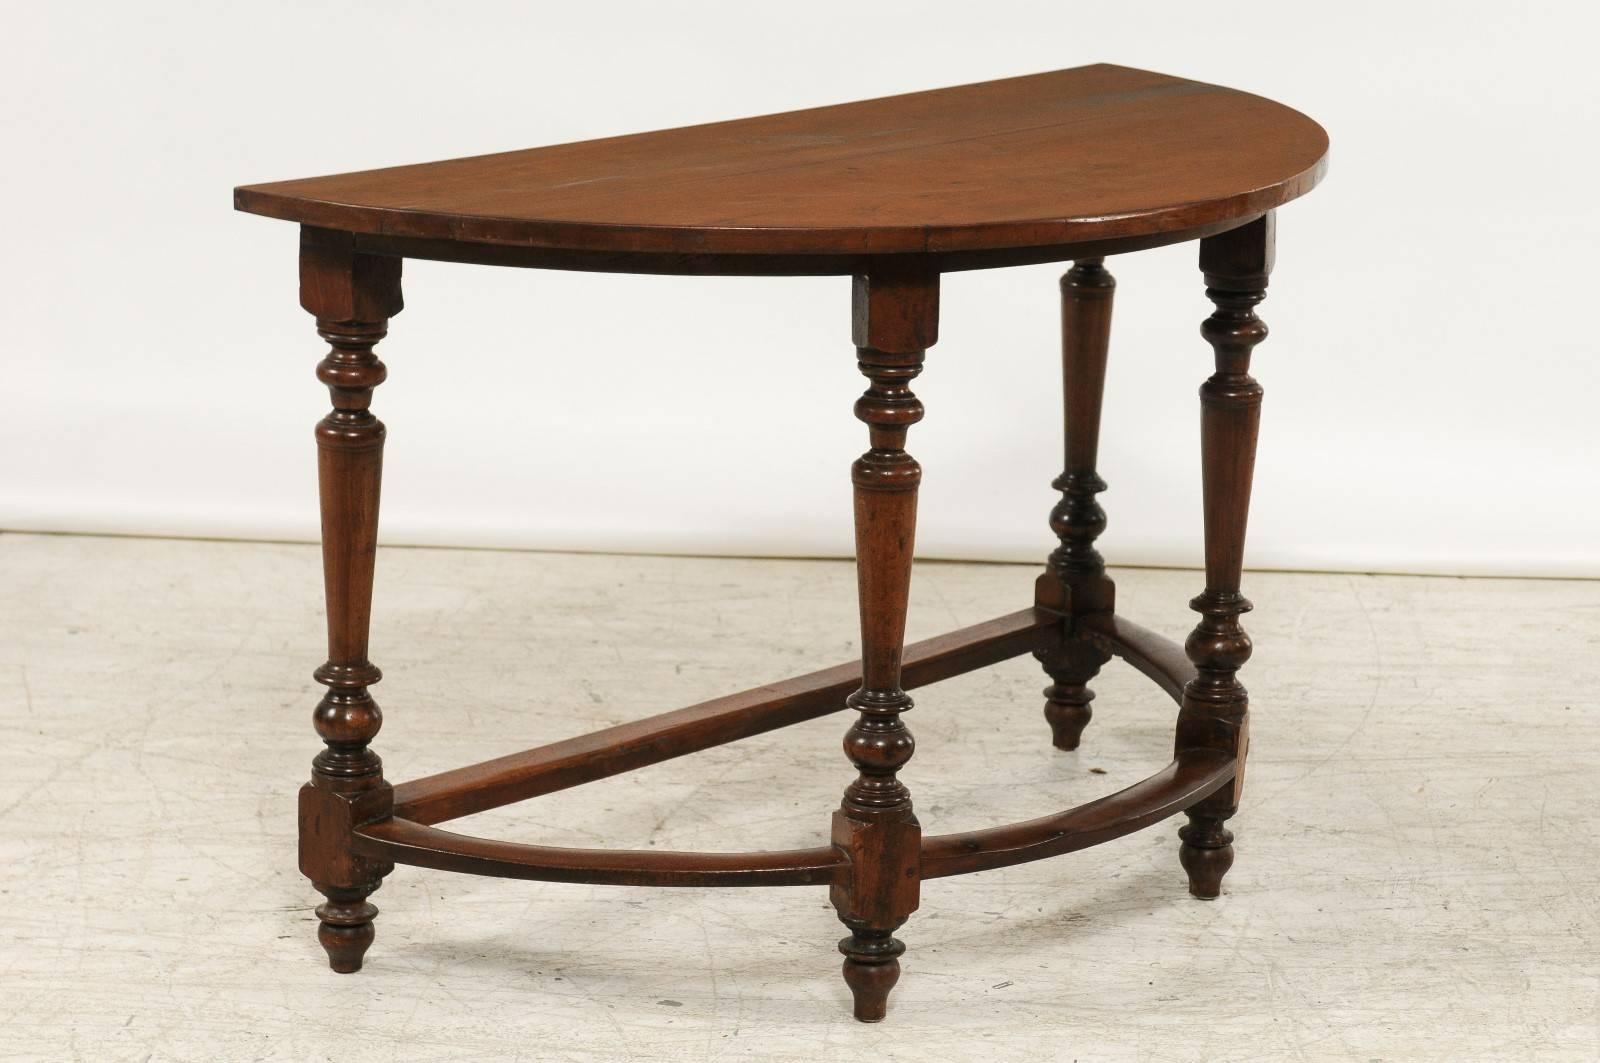 Pair of Large 1820s Italian Walnut Demilune Console Tables with Turned Legs 1